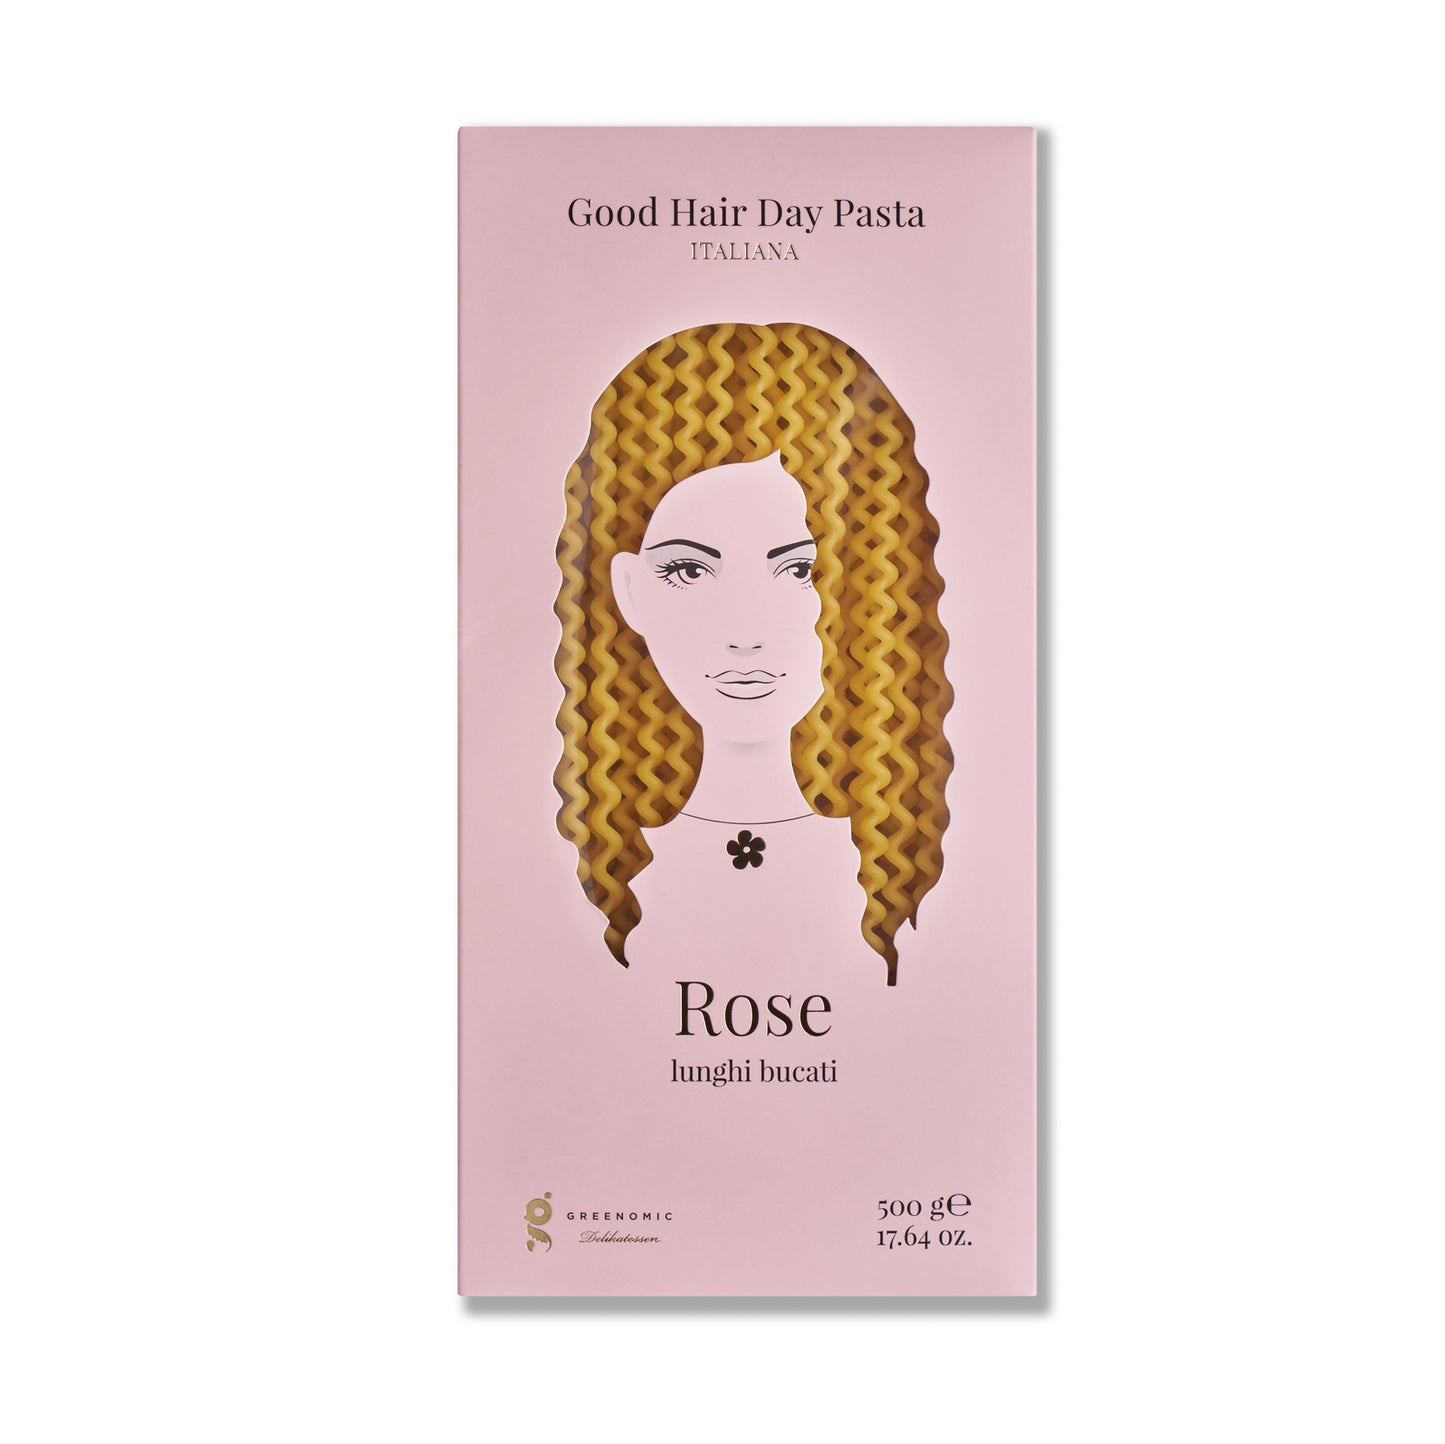 GOOD HAIR DAY PASTA ROSE LUNGHI BUCATI - 500g